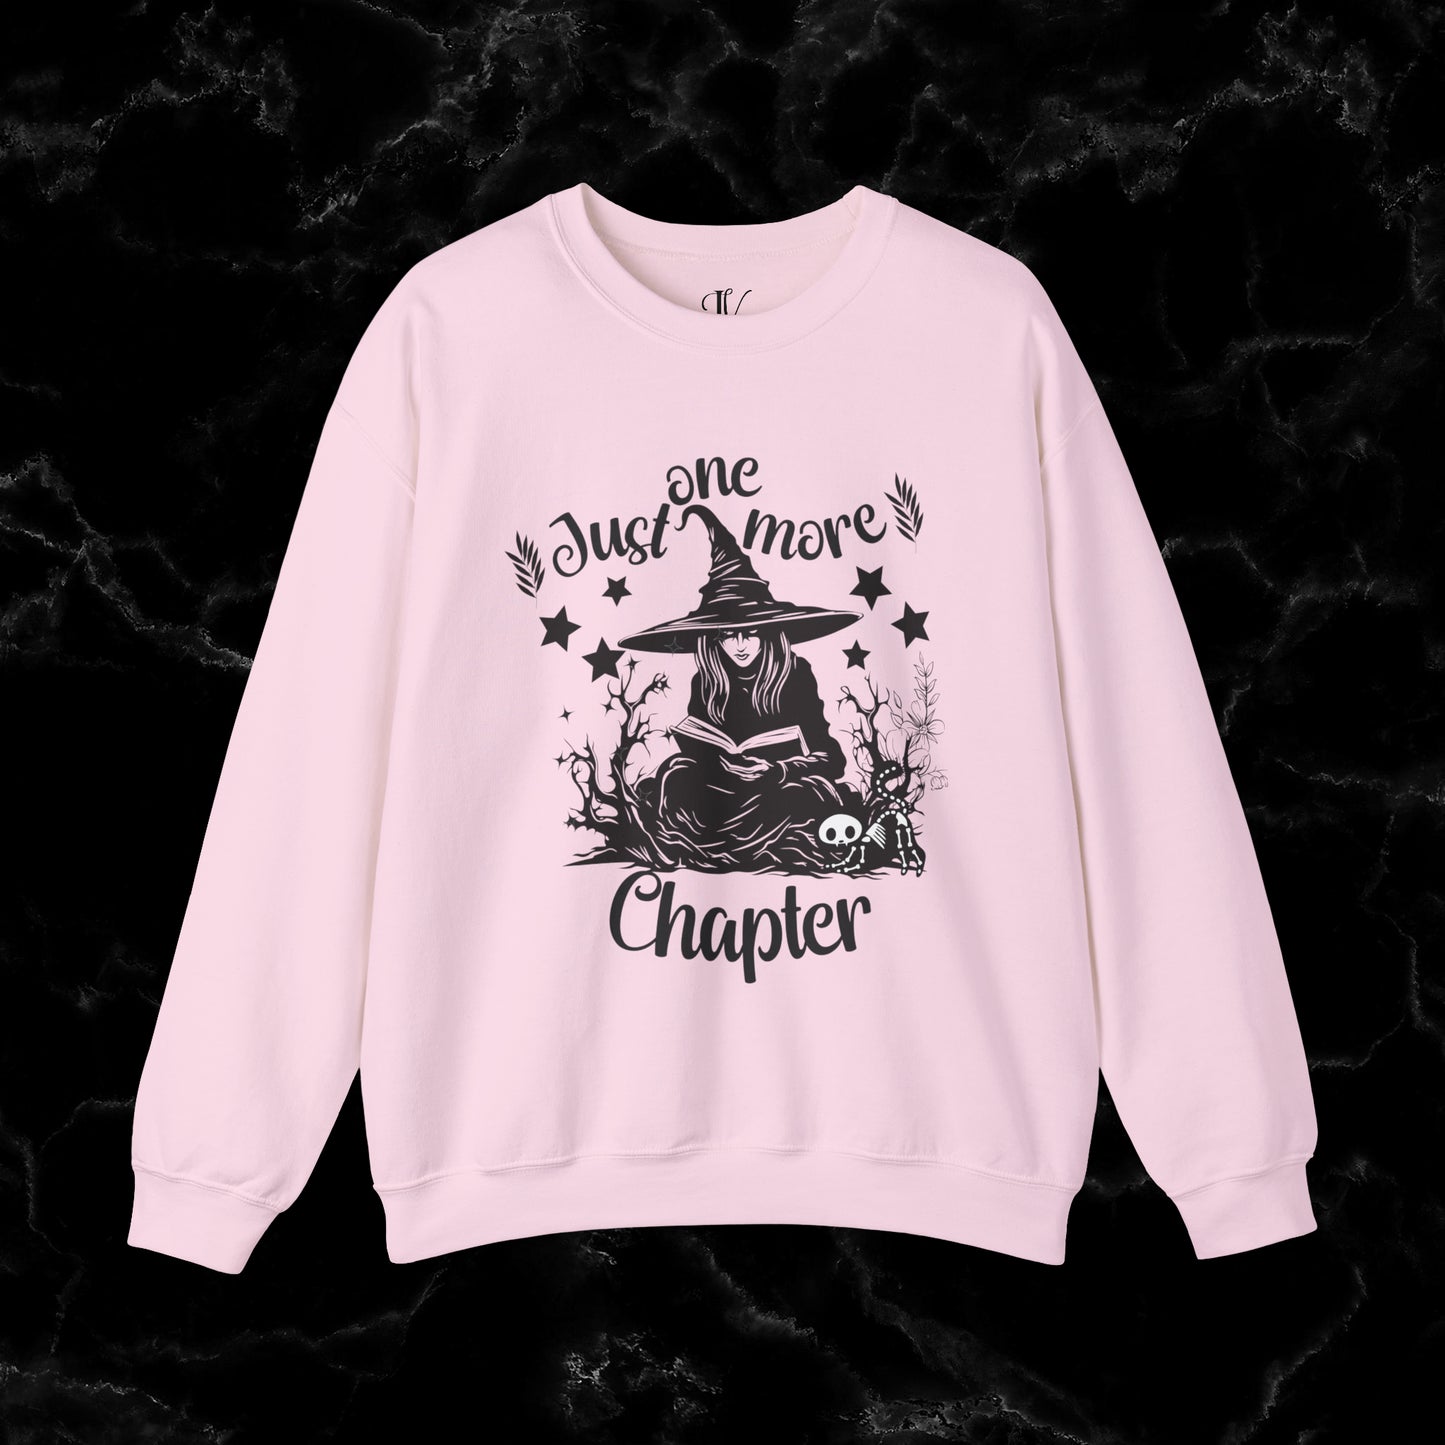 One More Chapter Sweatshirt - Book Lover Gift, Librarian Shirt, Reading Witch - Cozy Sweatshirt for Book Lovers Halloween Sweatshirt S Light Pink 